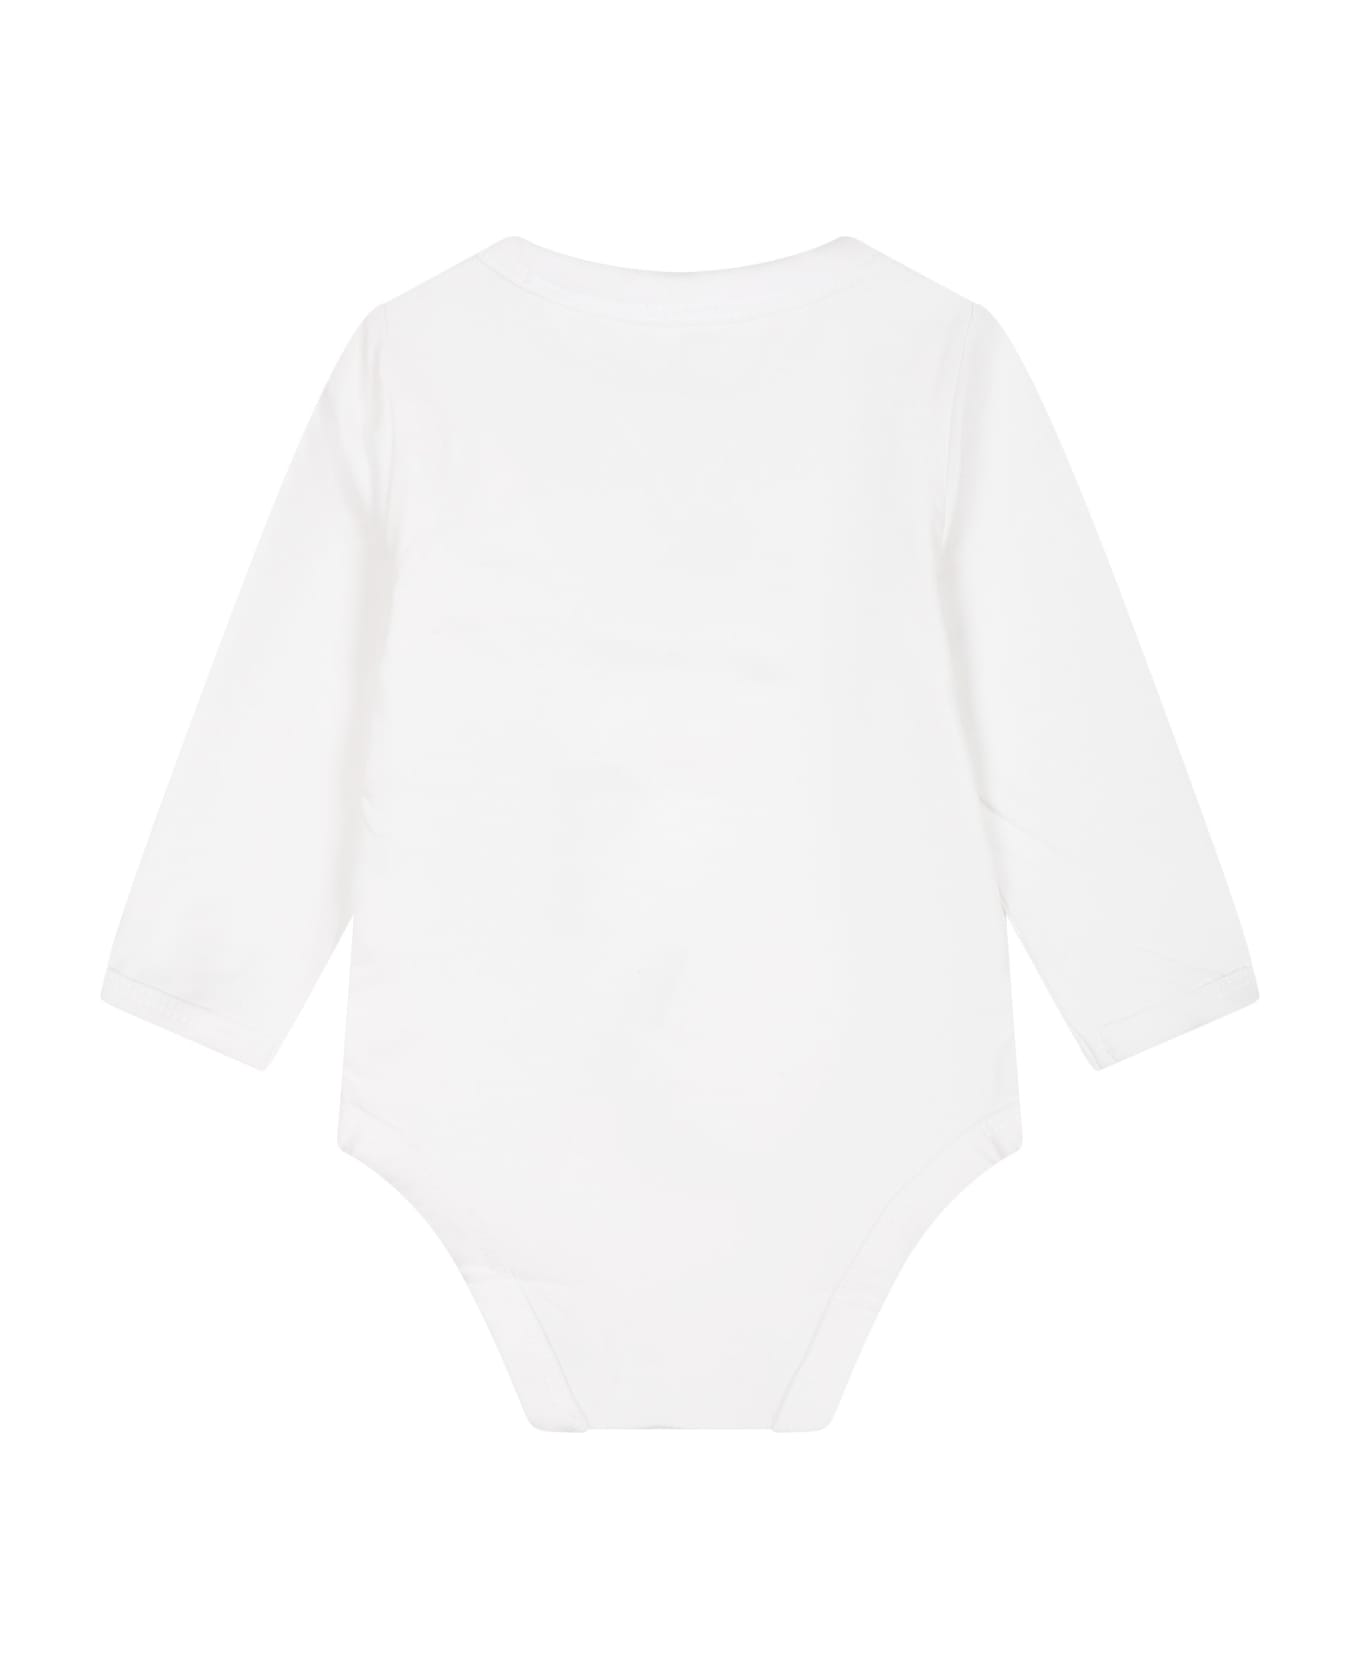 Tommy Hilfiger White Bodysuit For Babies With Logo - White